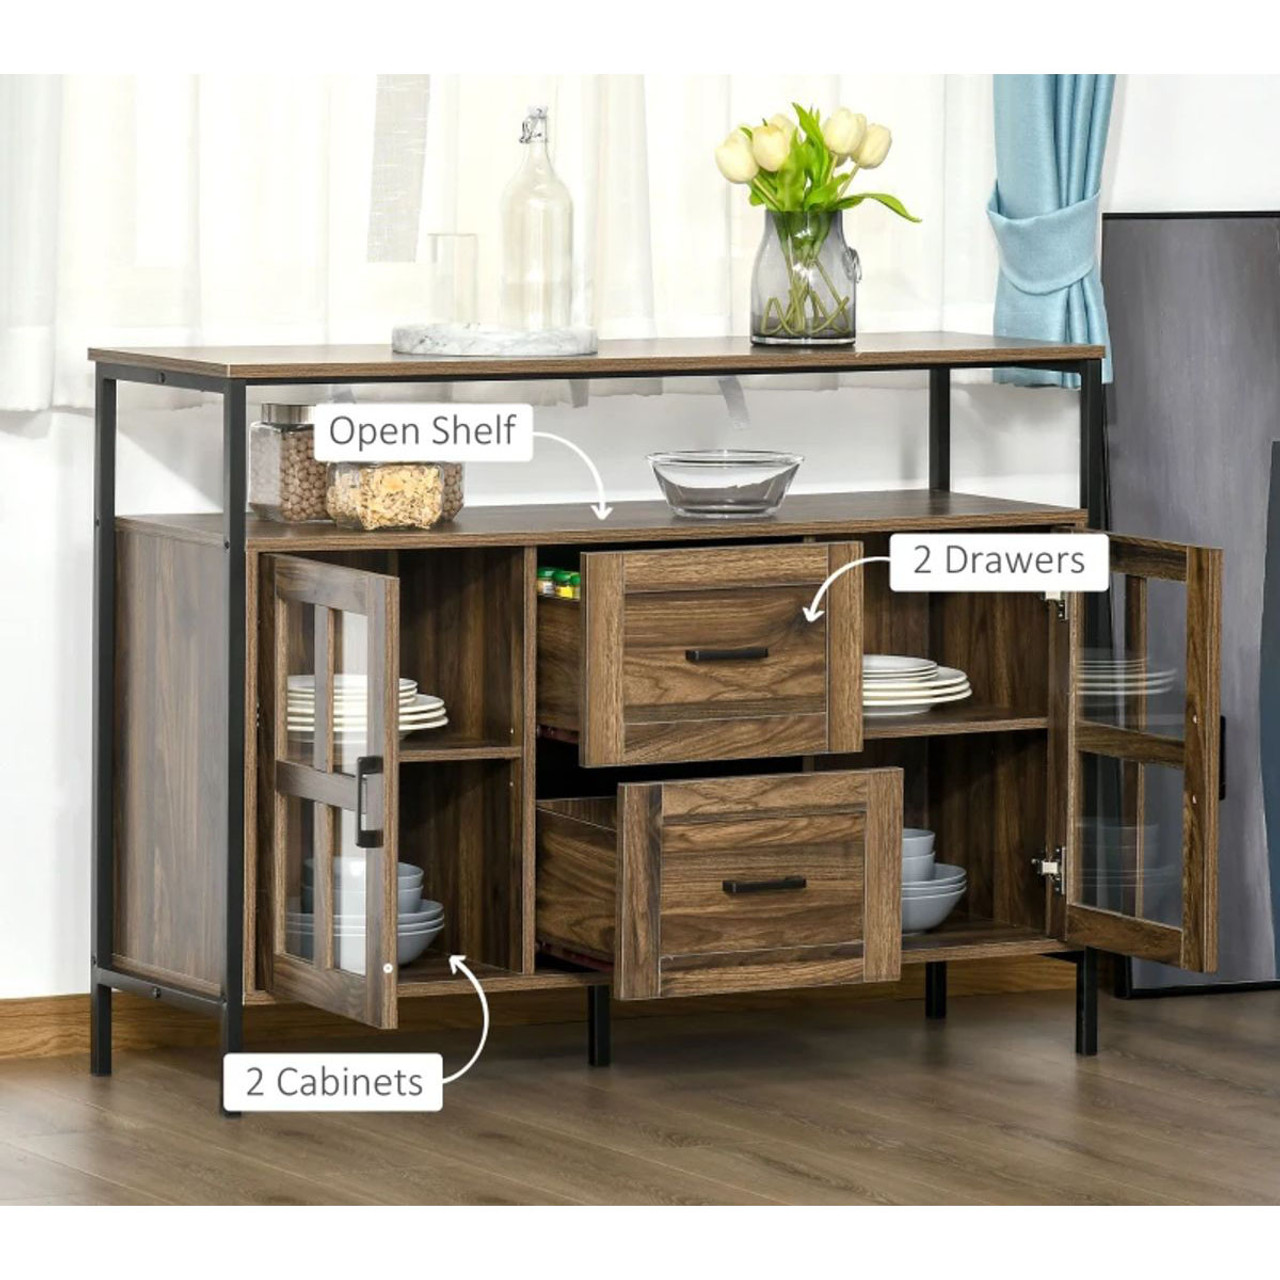 Rustic Kitchen Serving Buffet Cabinet with Adjustable Shelves product image